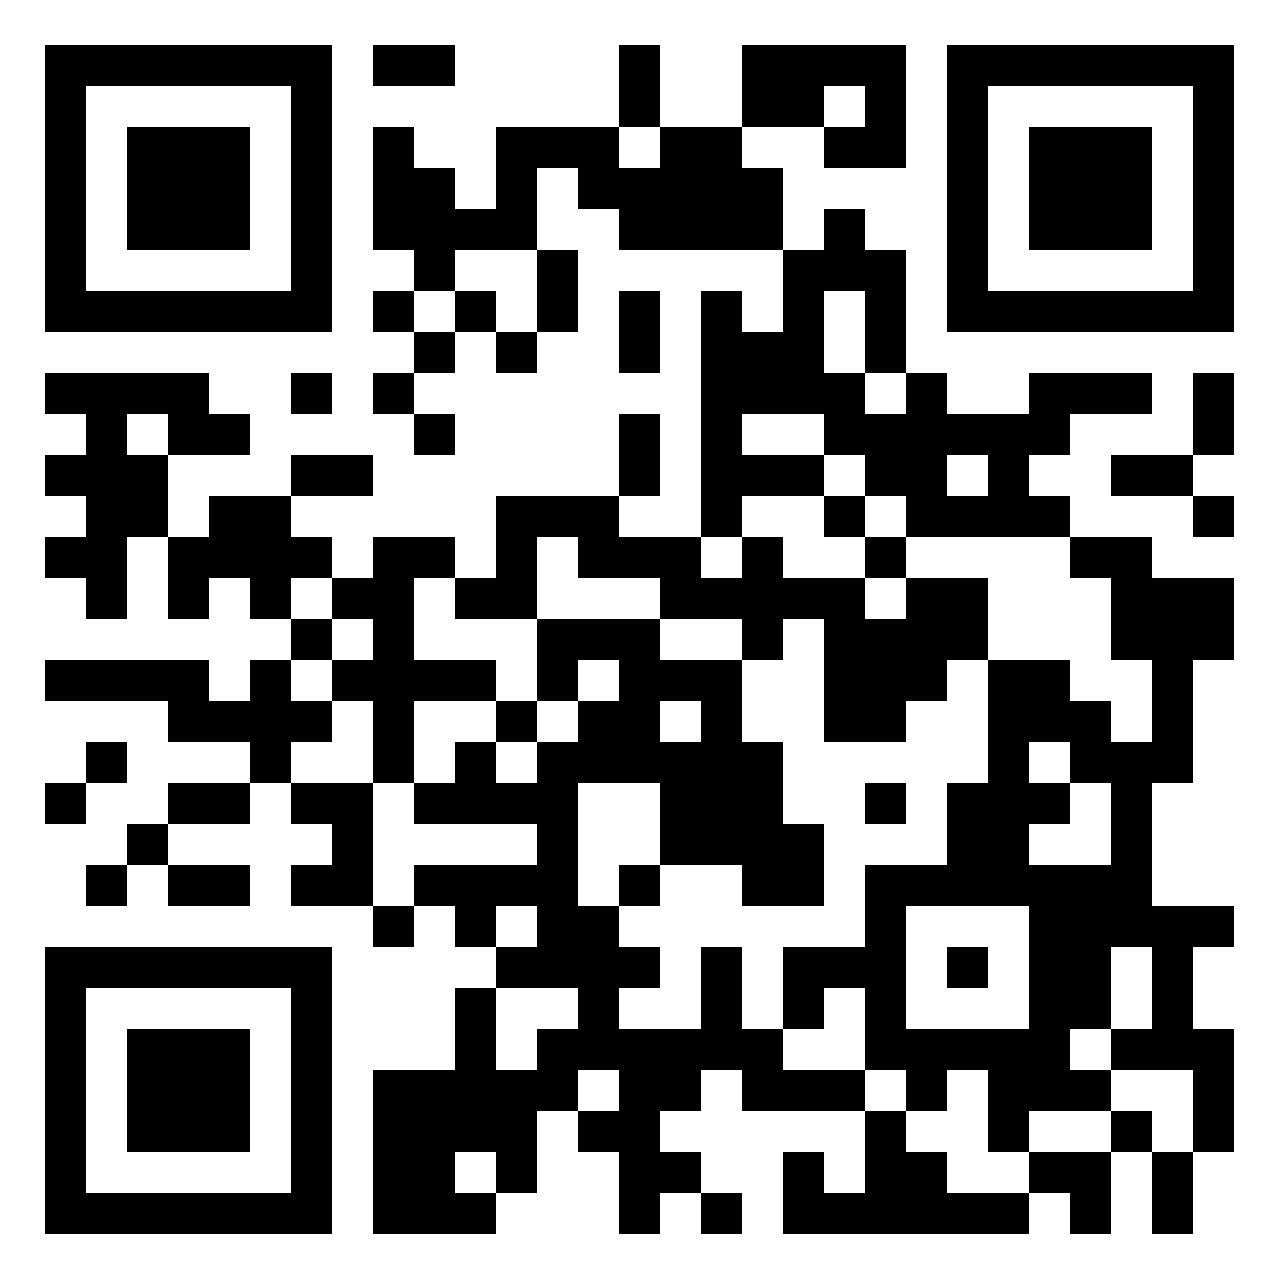 Please scan to start